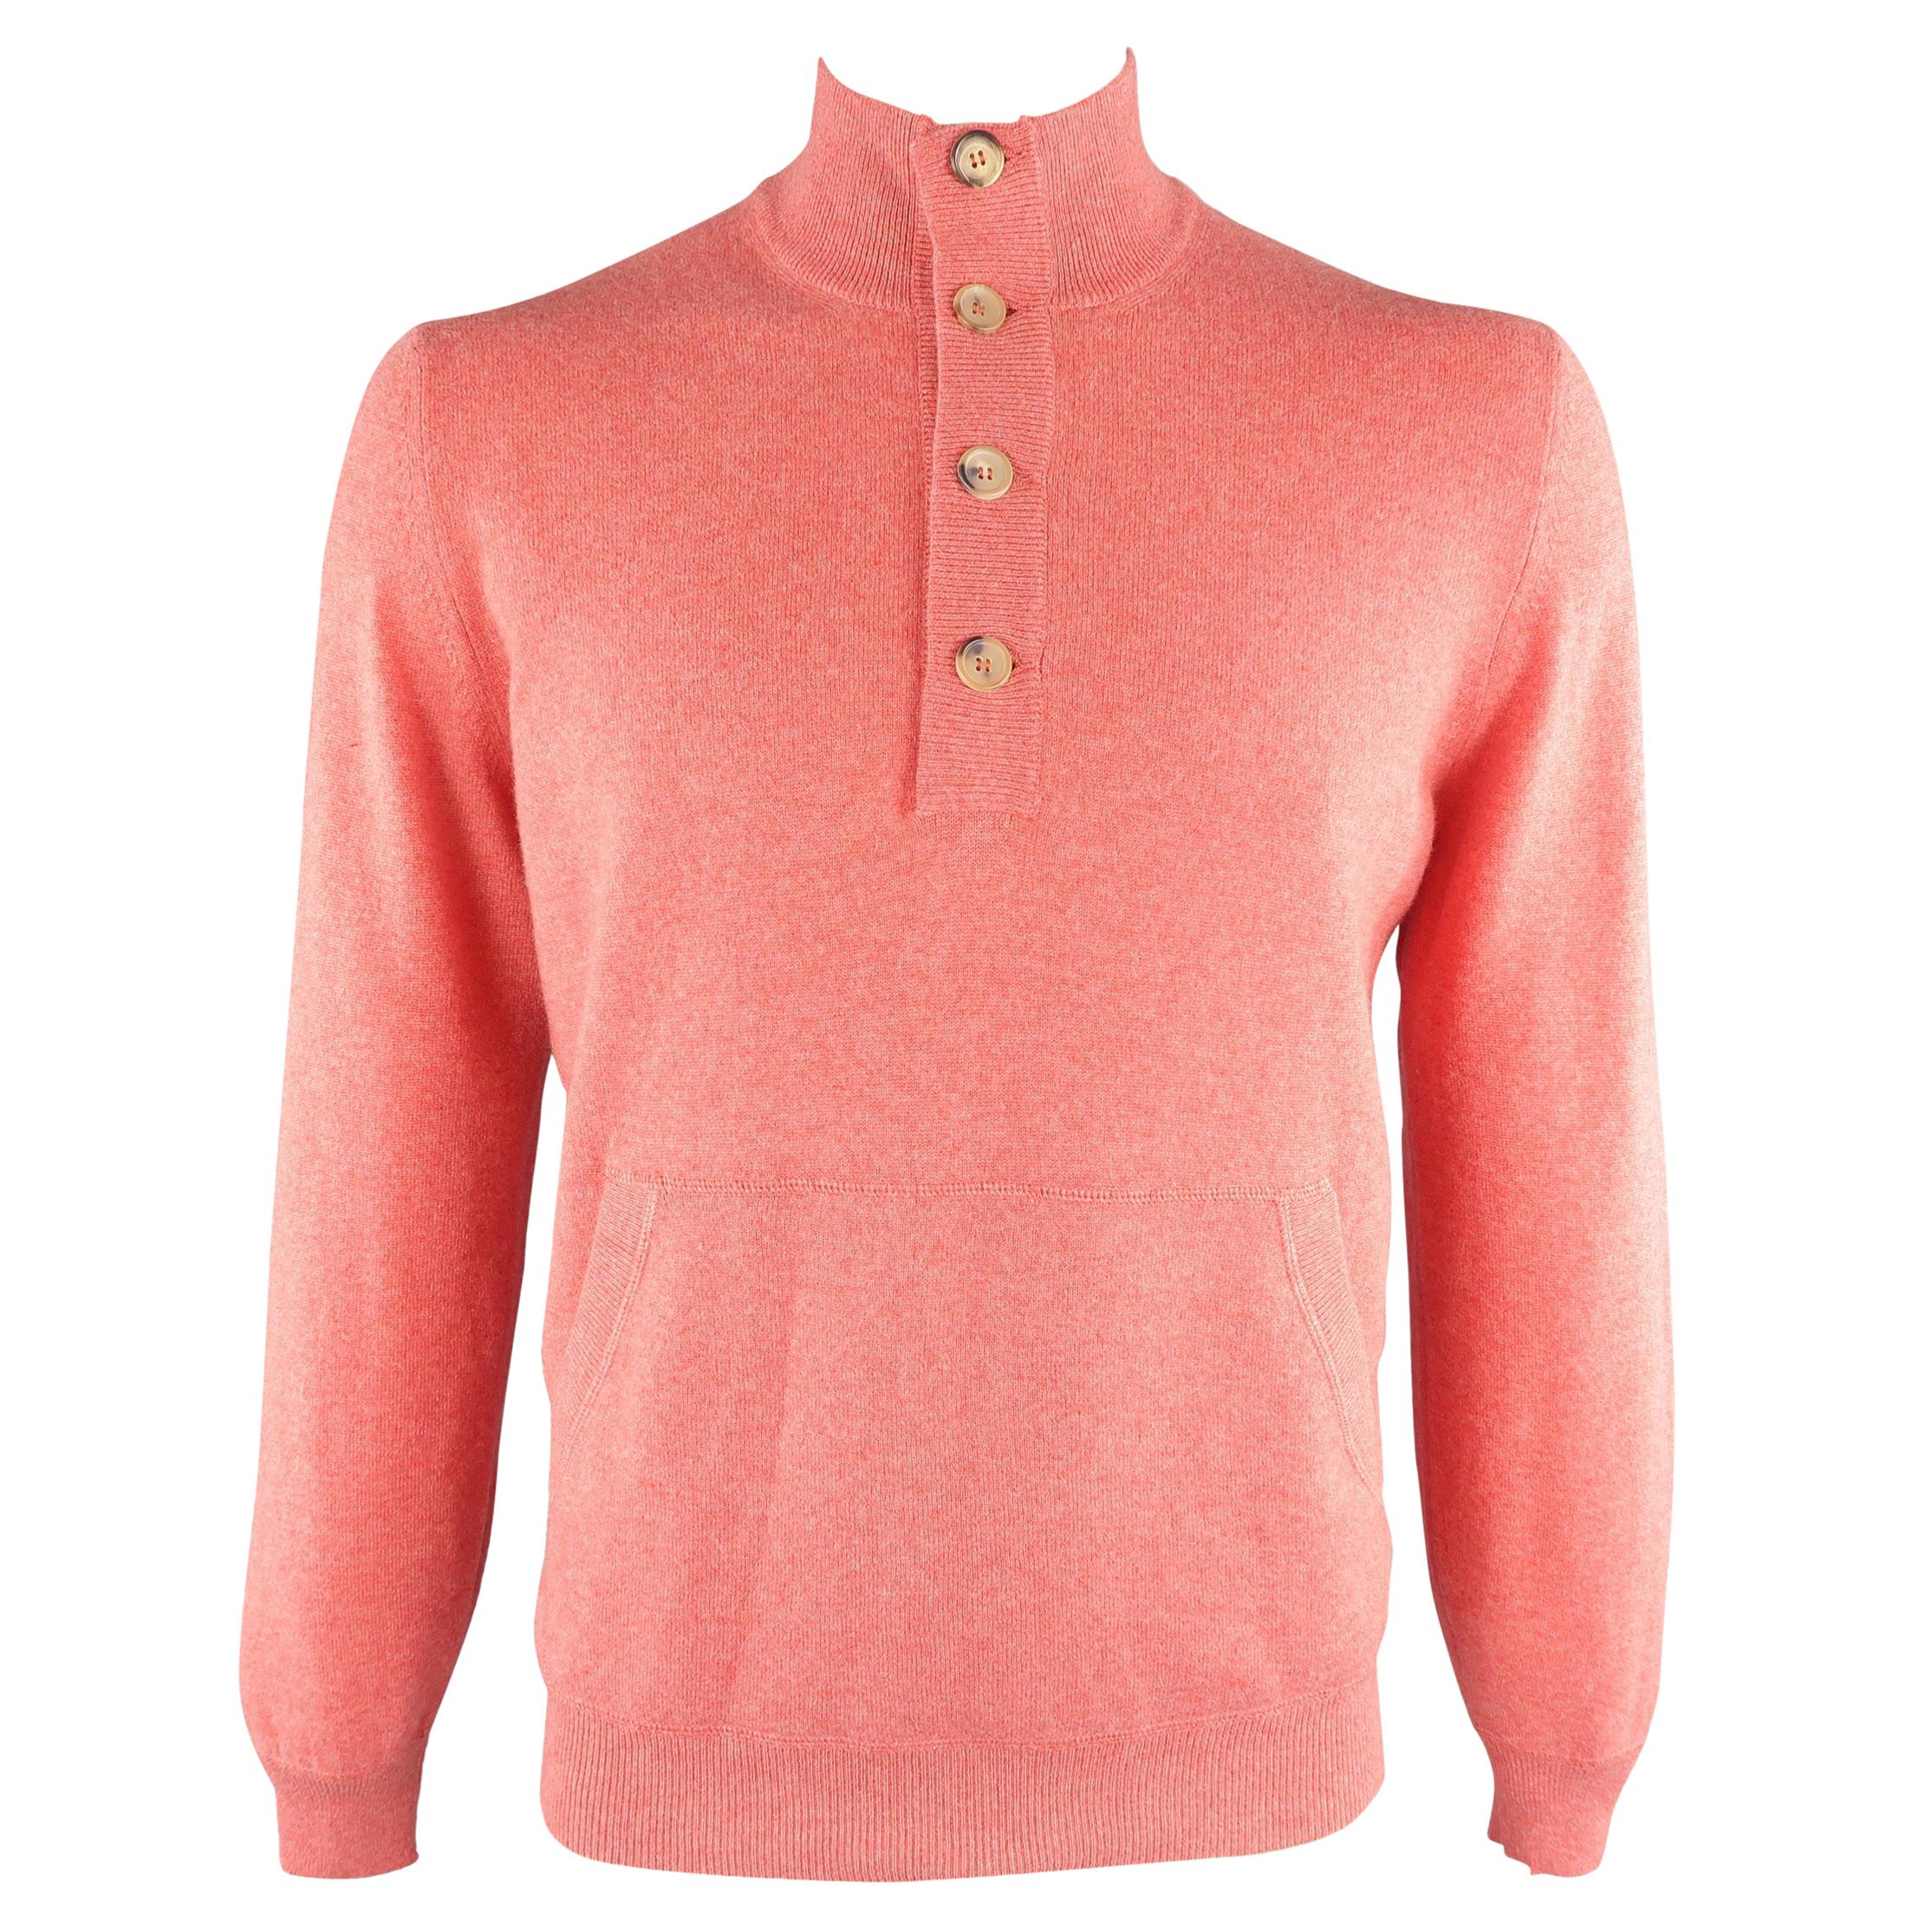 BRUNELLO CUCINELLI Size 42 Salmon Knitted Cashmere Henley Sweater